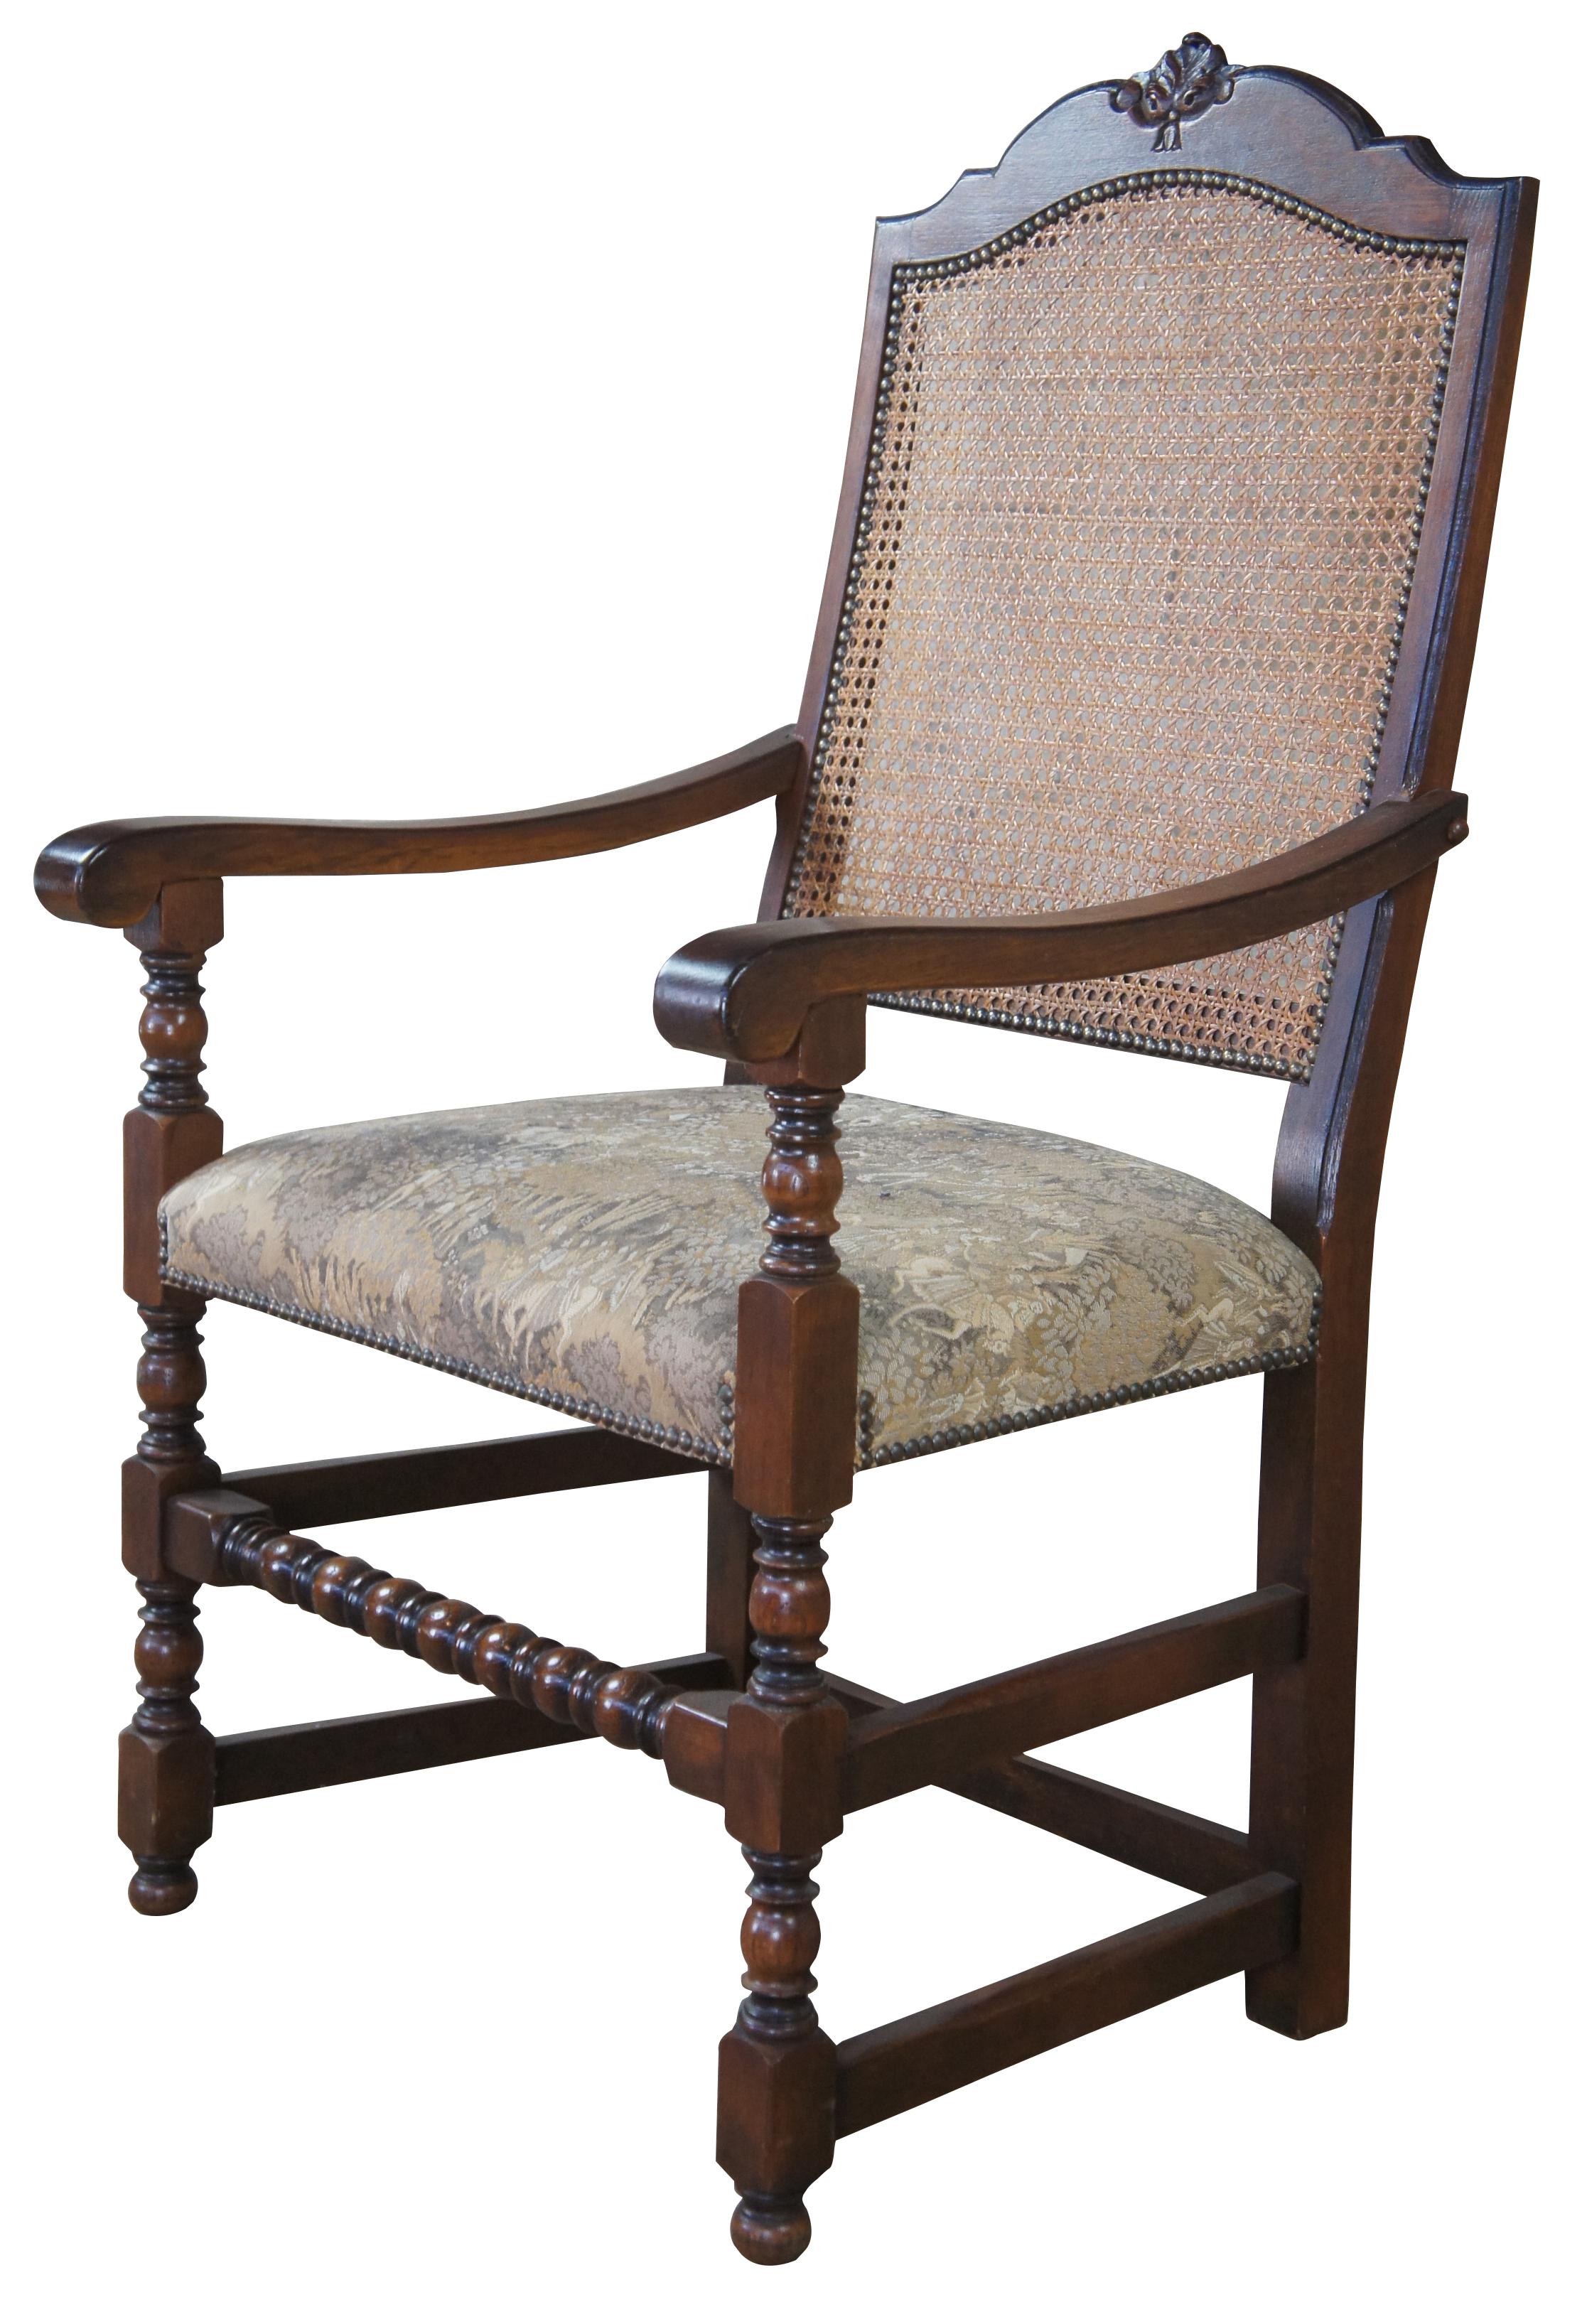 Vintage Spanish Revival arm or accent chair. Made of oak, featuring a caned back, upholstered aubusson style seat with nailhead trim and turned posts.
  